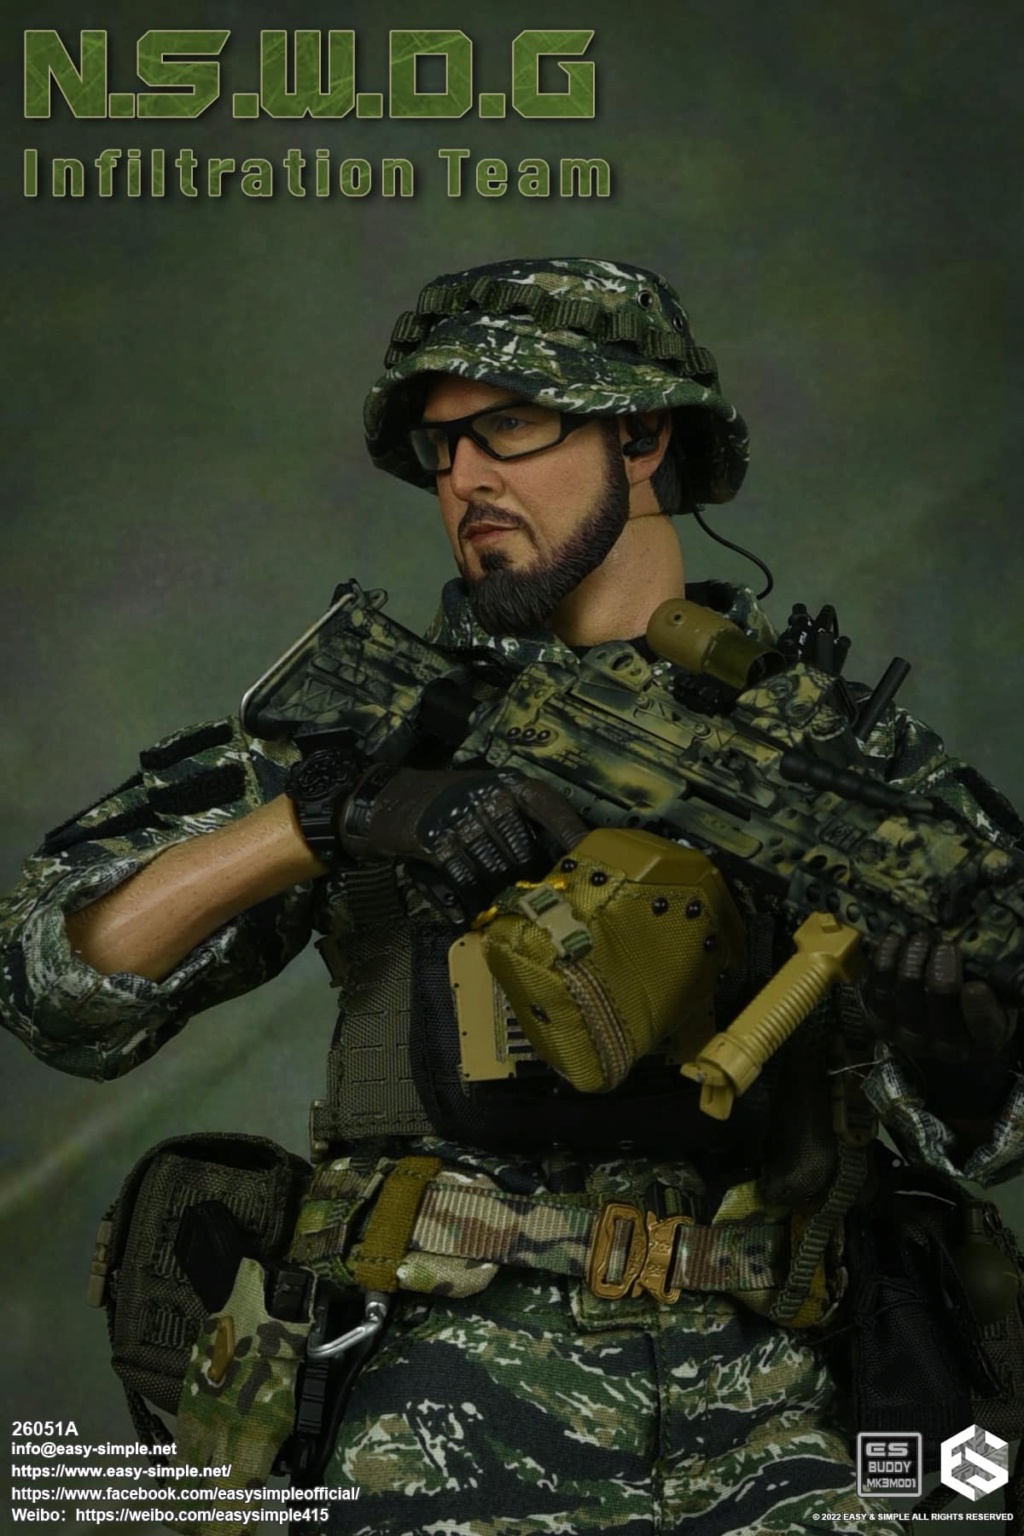 InfilitrationTeam - NEW PRODUCT: EASY AND SIMPLE 1/6 SCALE FIGURE: N.S.W.D.G INFILTRATION TEAM - (2 Versions) 11854